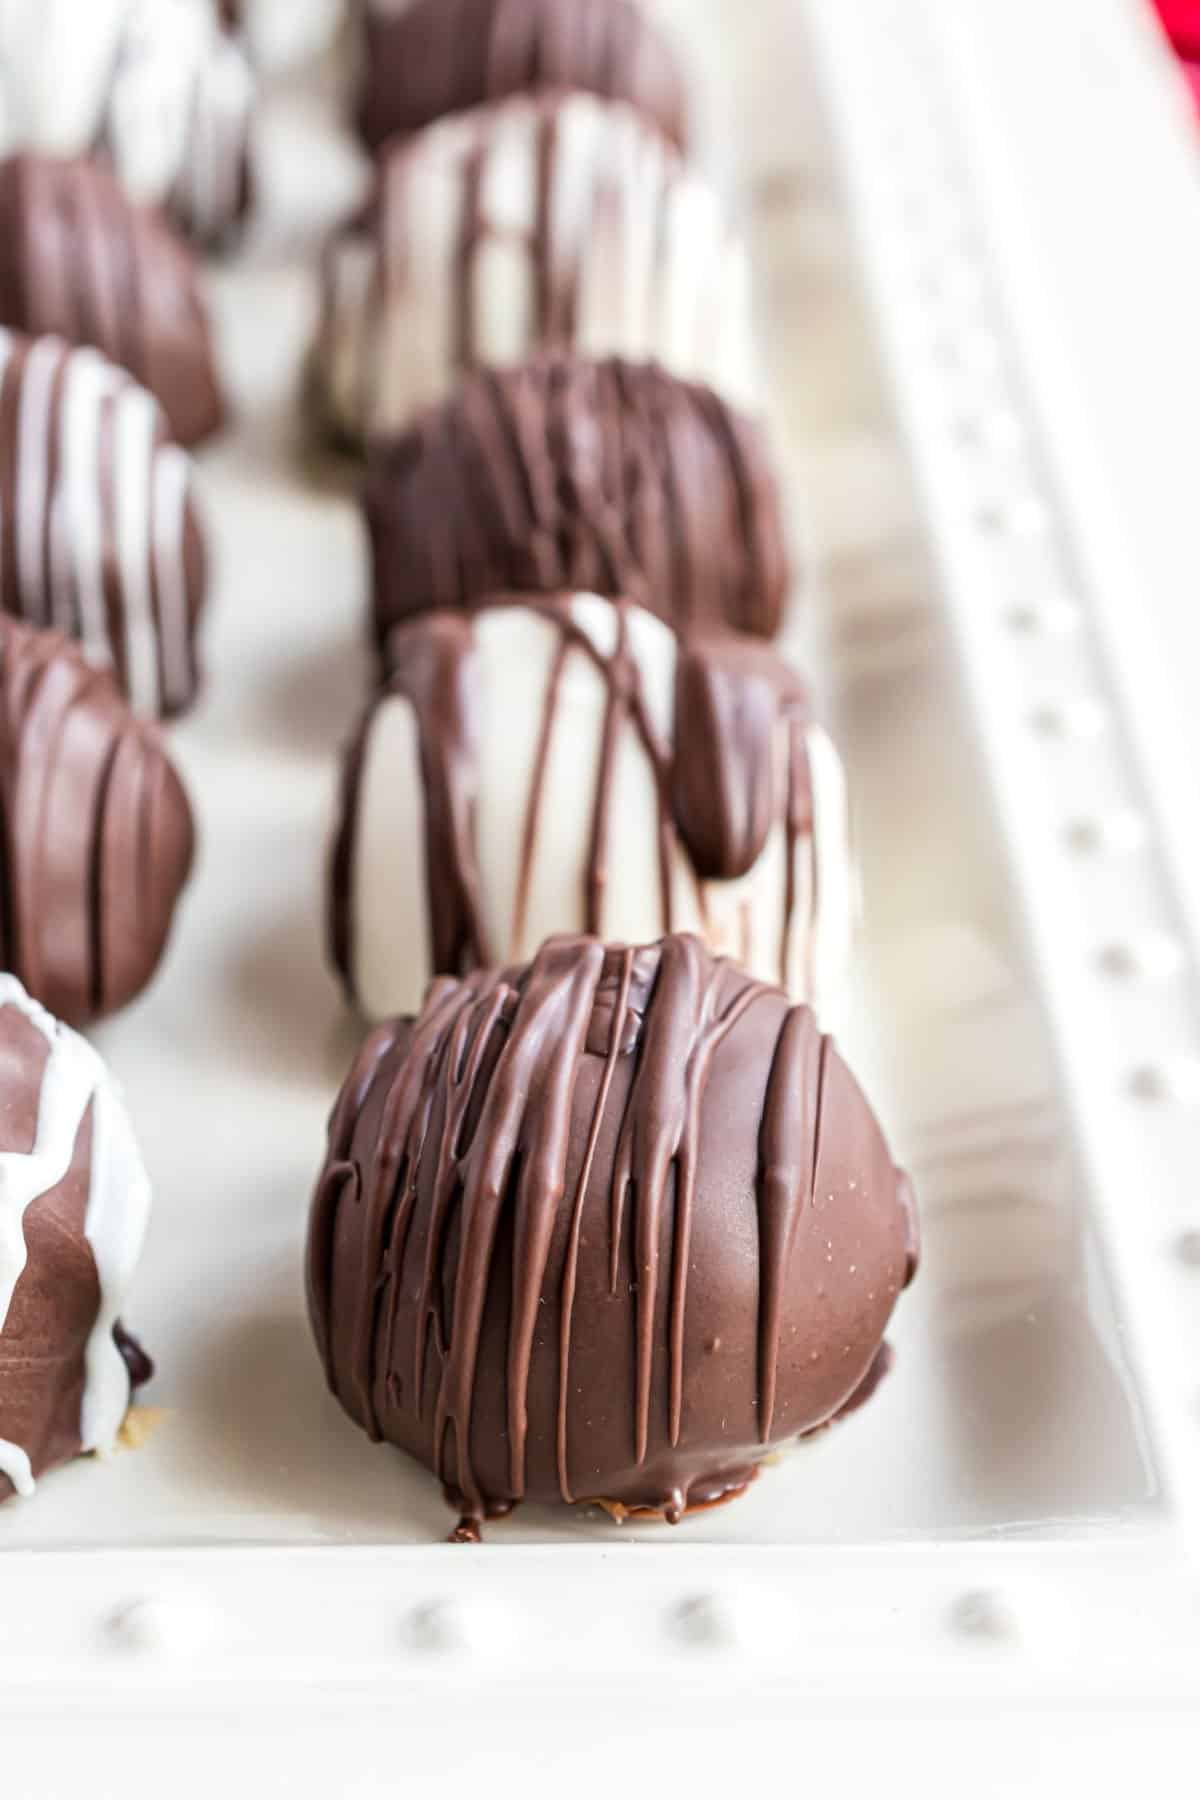 Chocolate chip truffles dipped in chocolate.